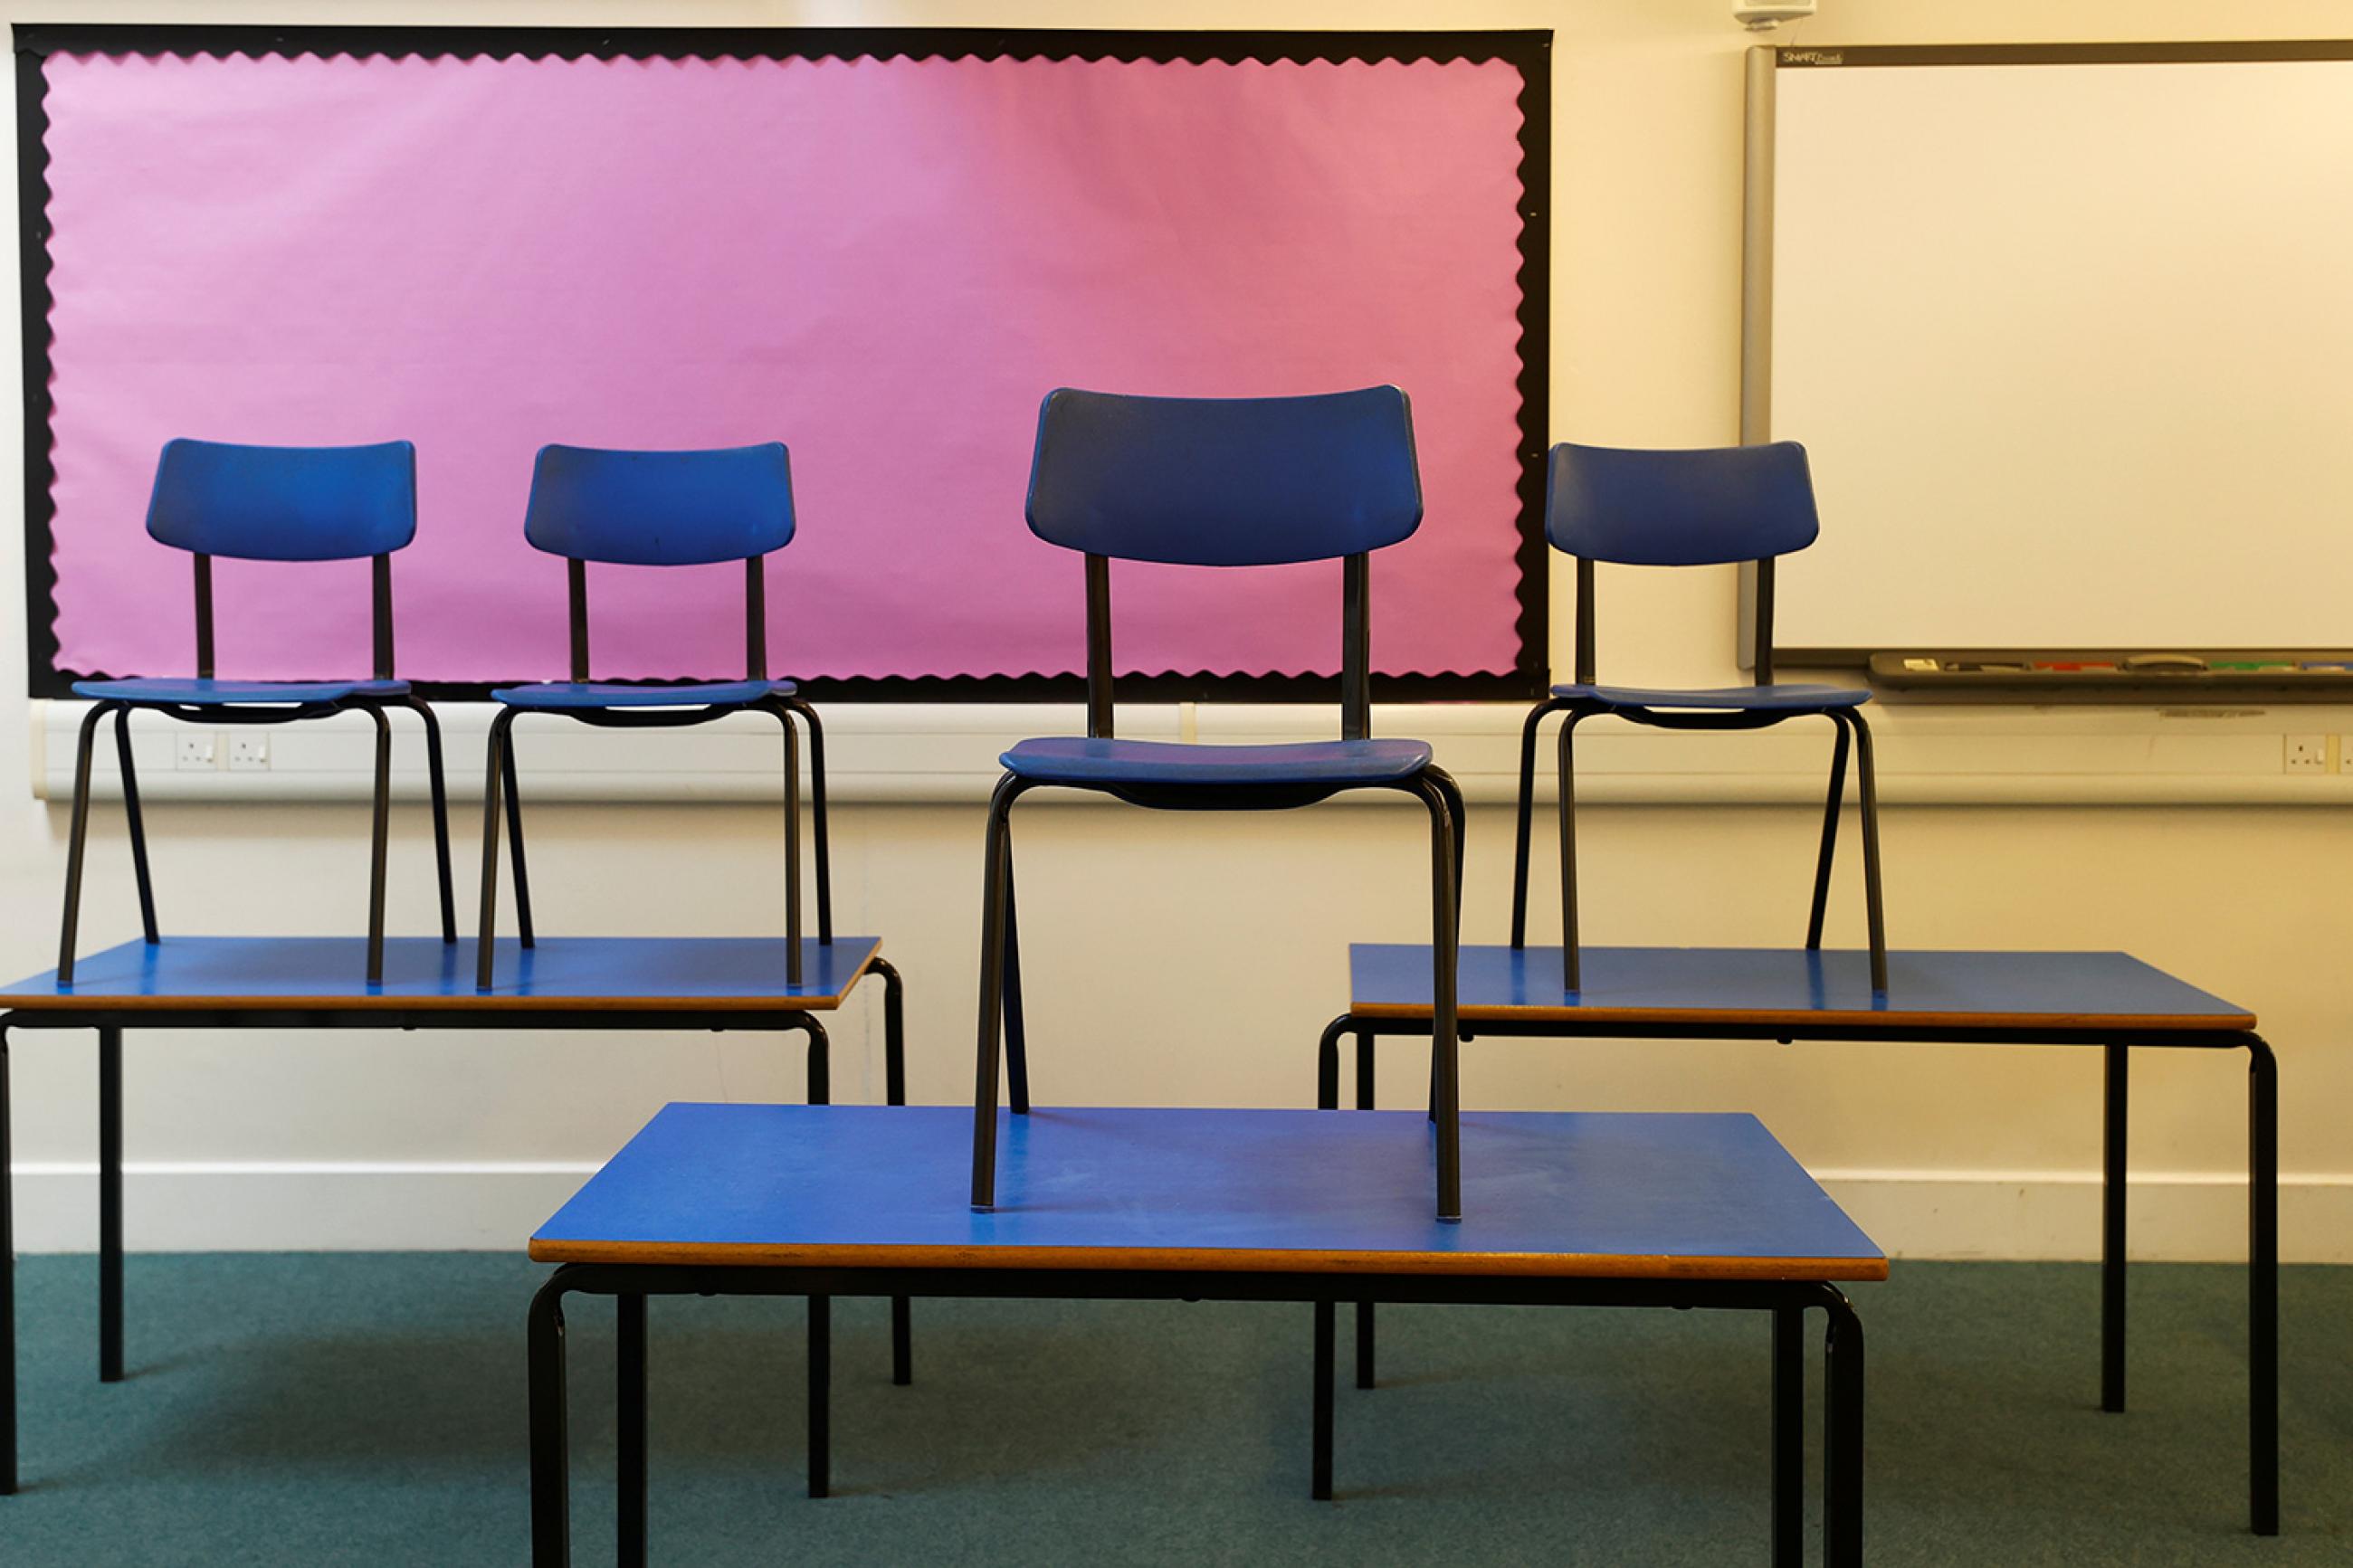 Chairs are pictured on top of tables in a classroom at Watlington Primary School during the last day of school, amid the coronavirus outbreak in Watlington, Britain, on July 17, 2020. The photo shows a number of tables with chairs stacked upon them. REUTERS/Eddie Keogh